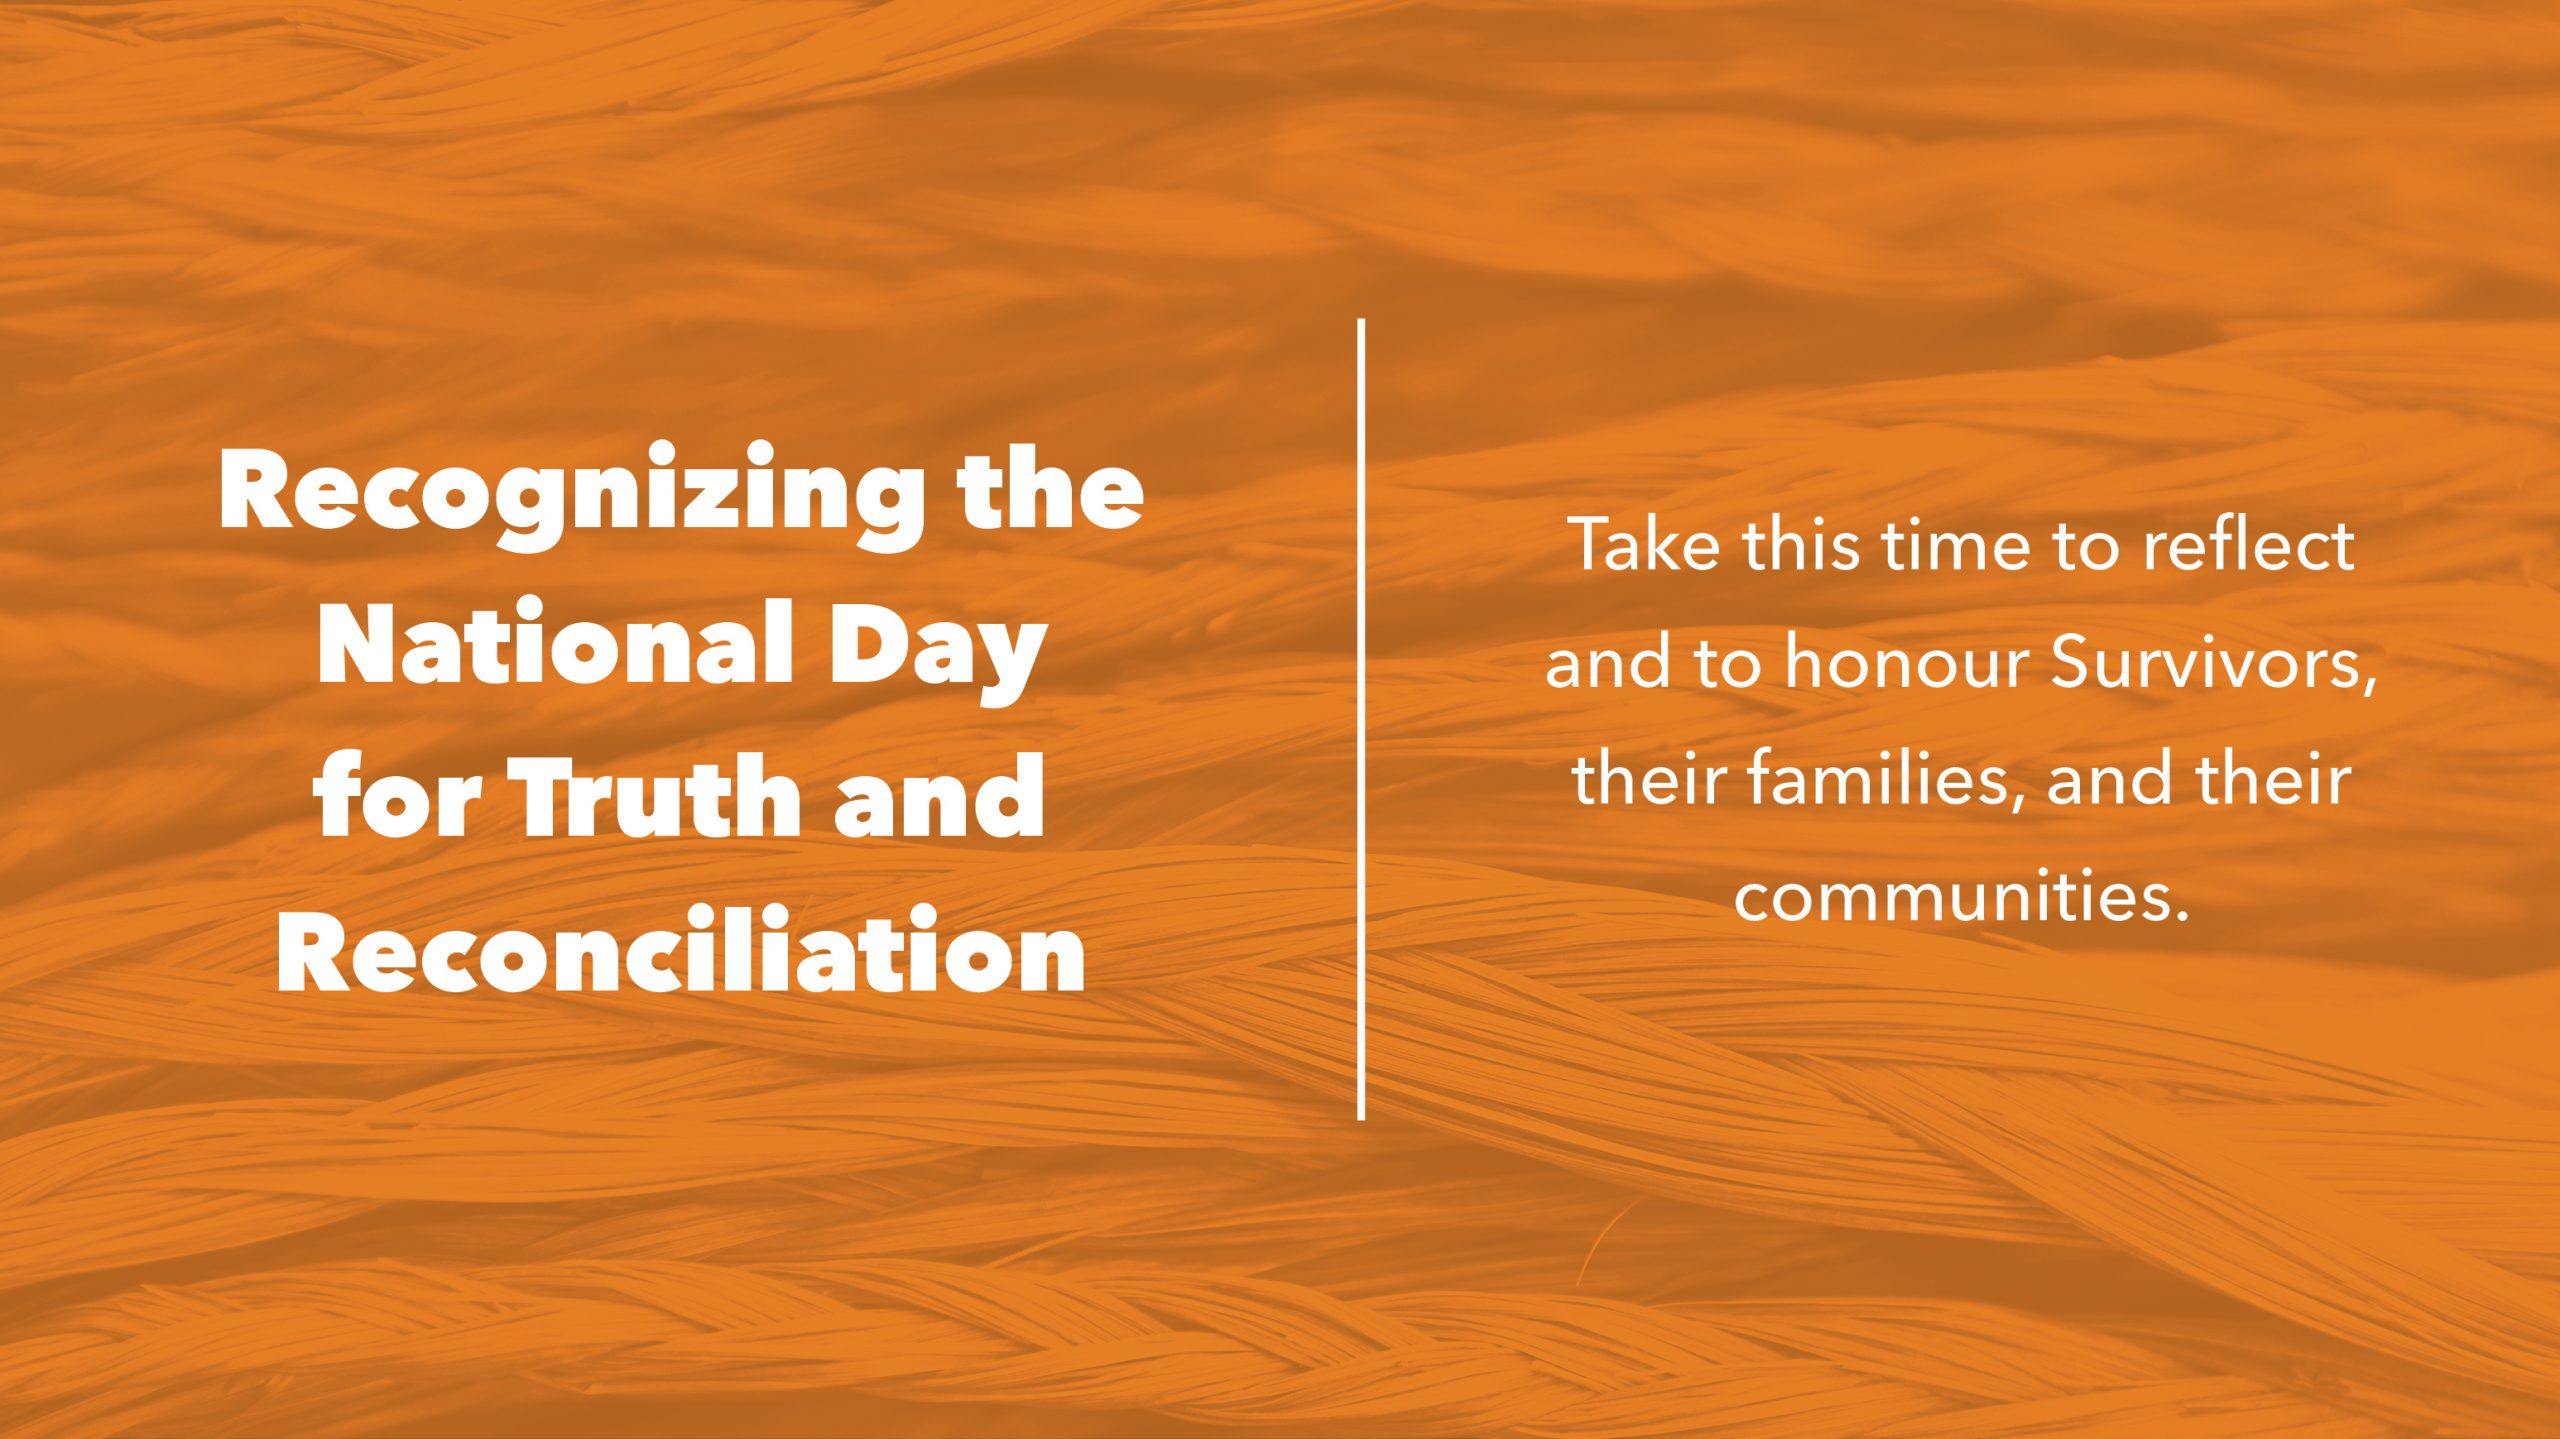 UWinnipeg recognizes the National Day for Truth and Reconciliation with a week of events and activities